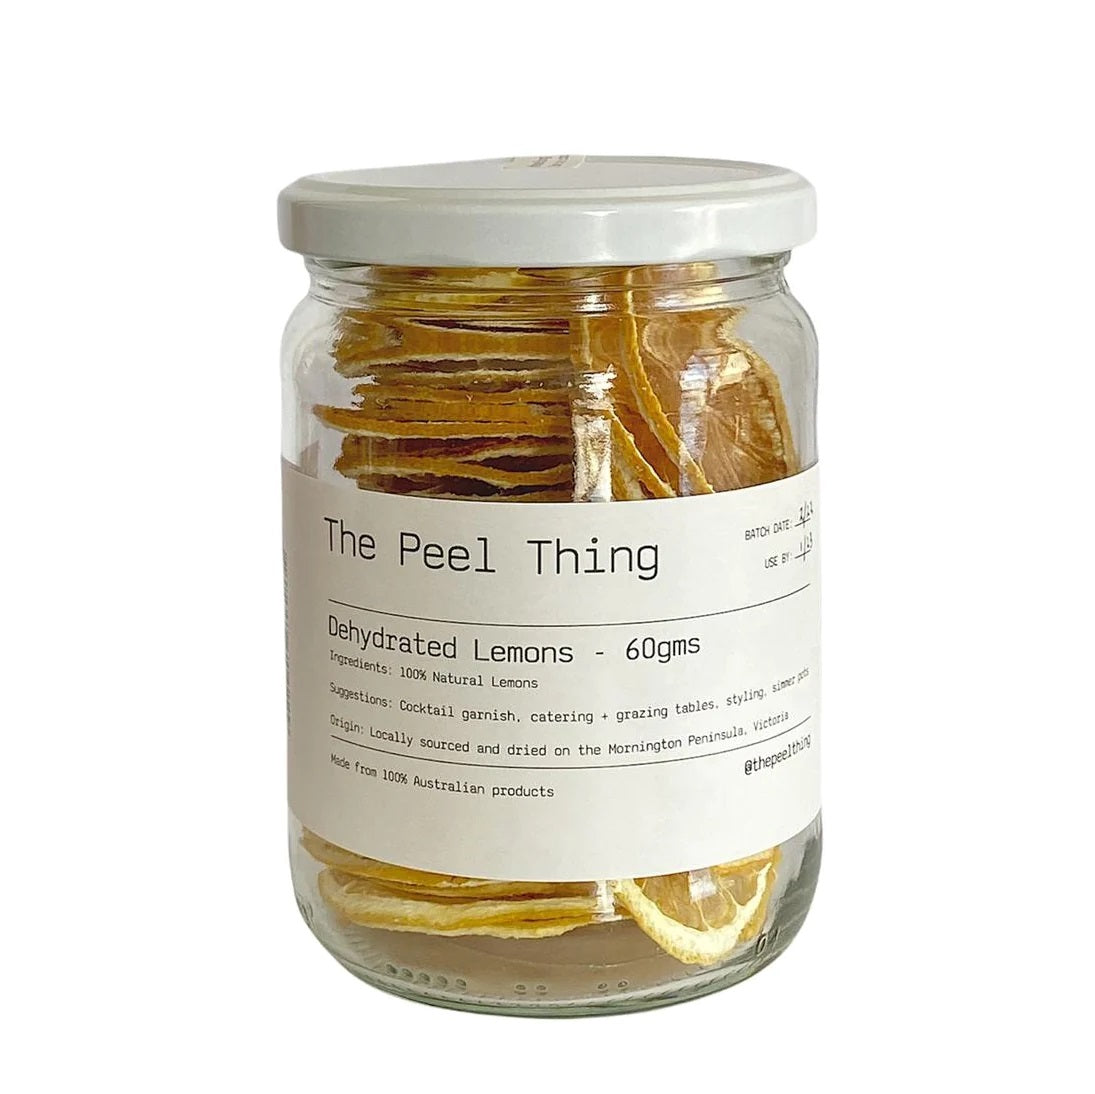 The Peel Thing Natural Dehydrated Lemons 60g